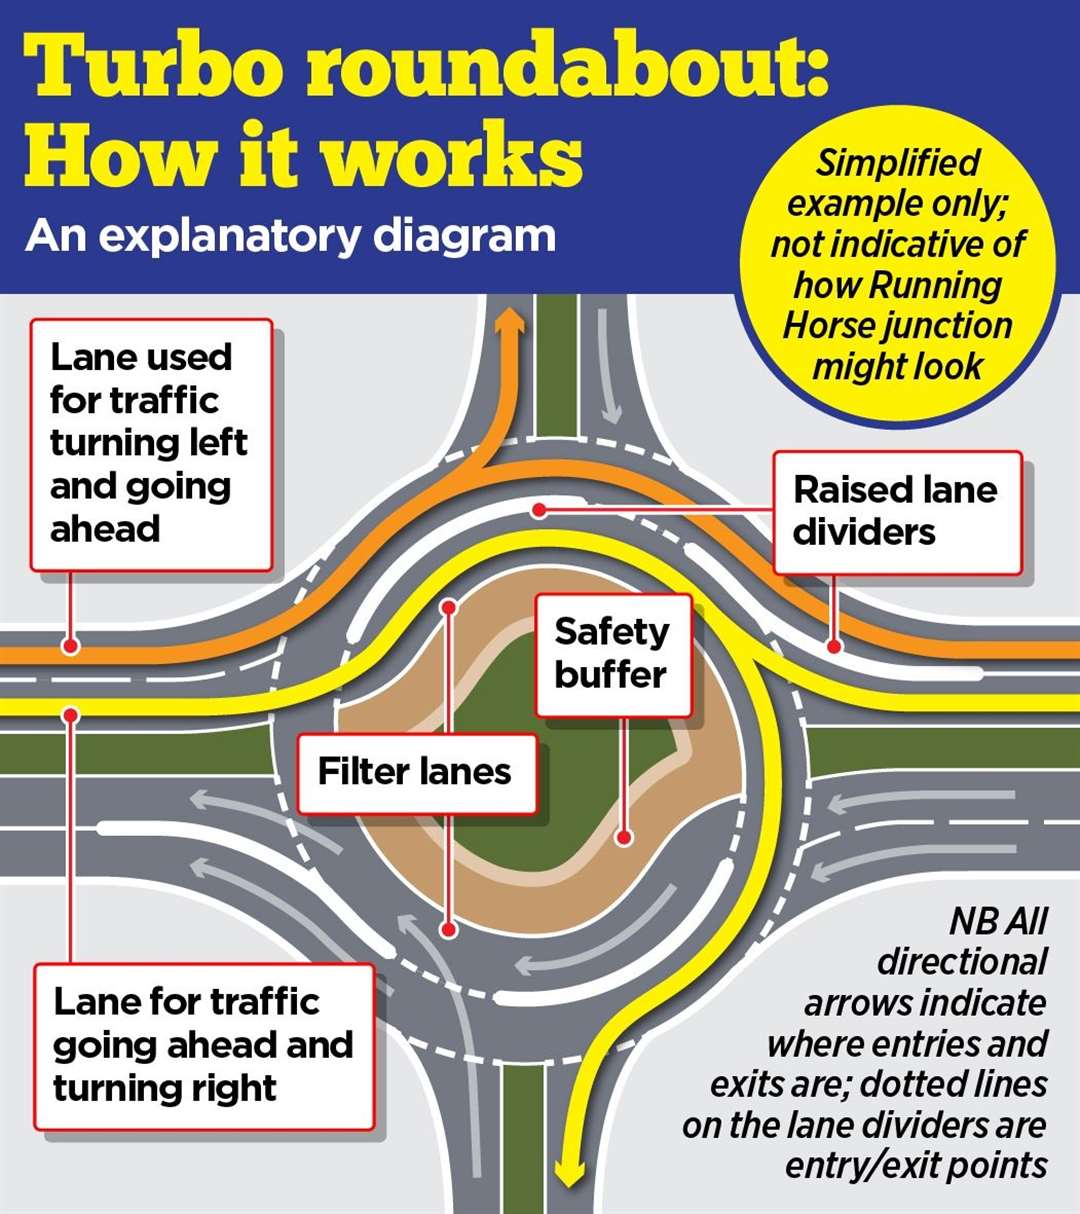 How the turbo roundabout would work